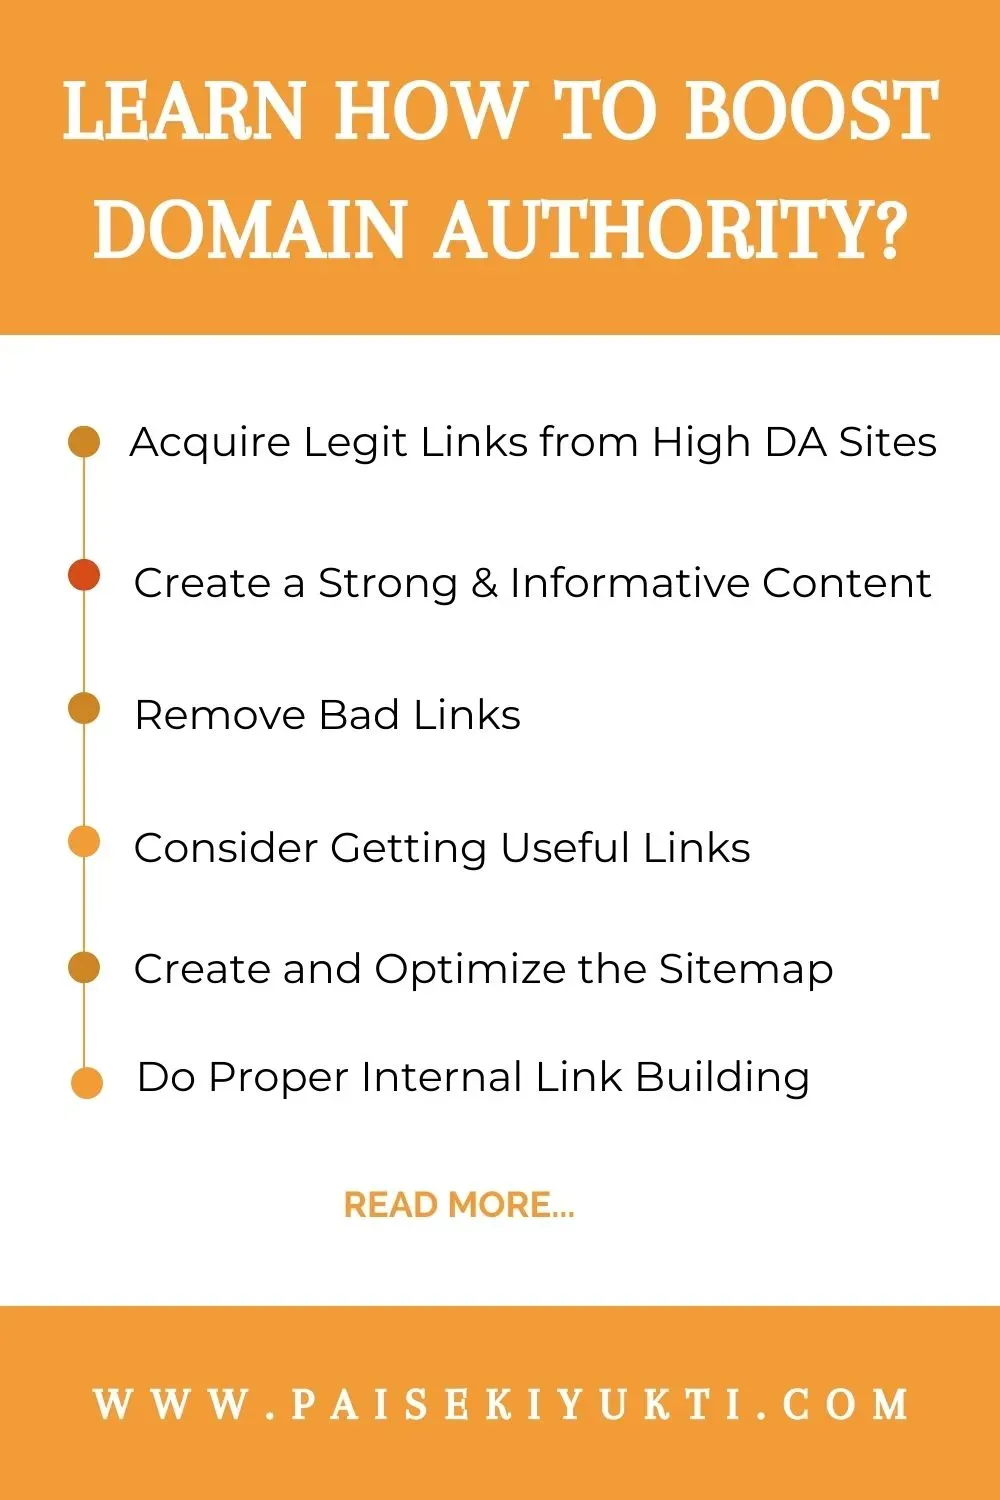 How to Boost Domain Authority Using 6 Simple Ways!